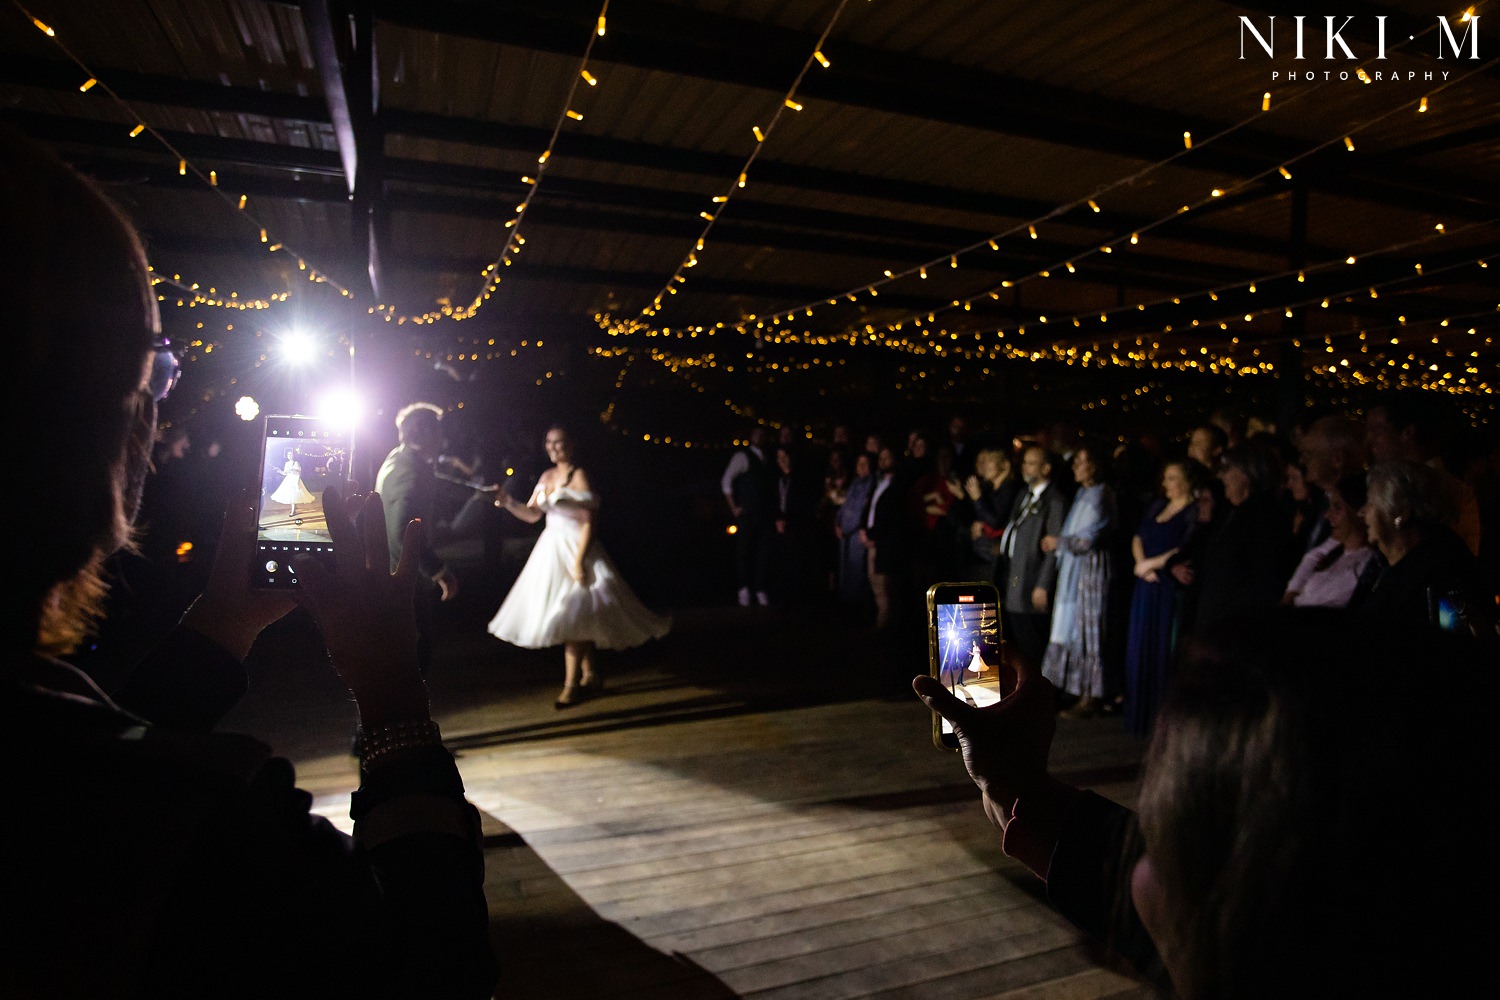 The bride and groom enter their reception venue with a dance, recorded by guests on their cellphones, at an Elgin wedding